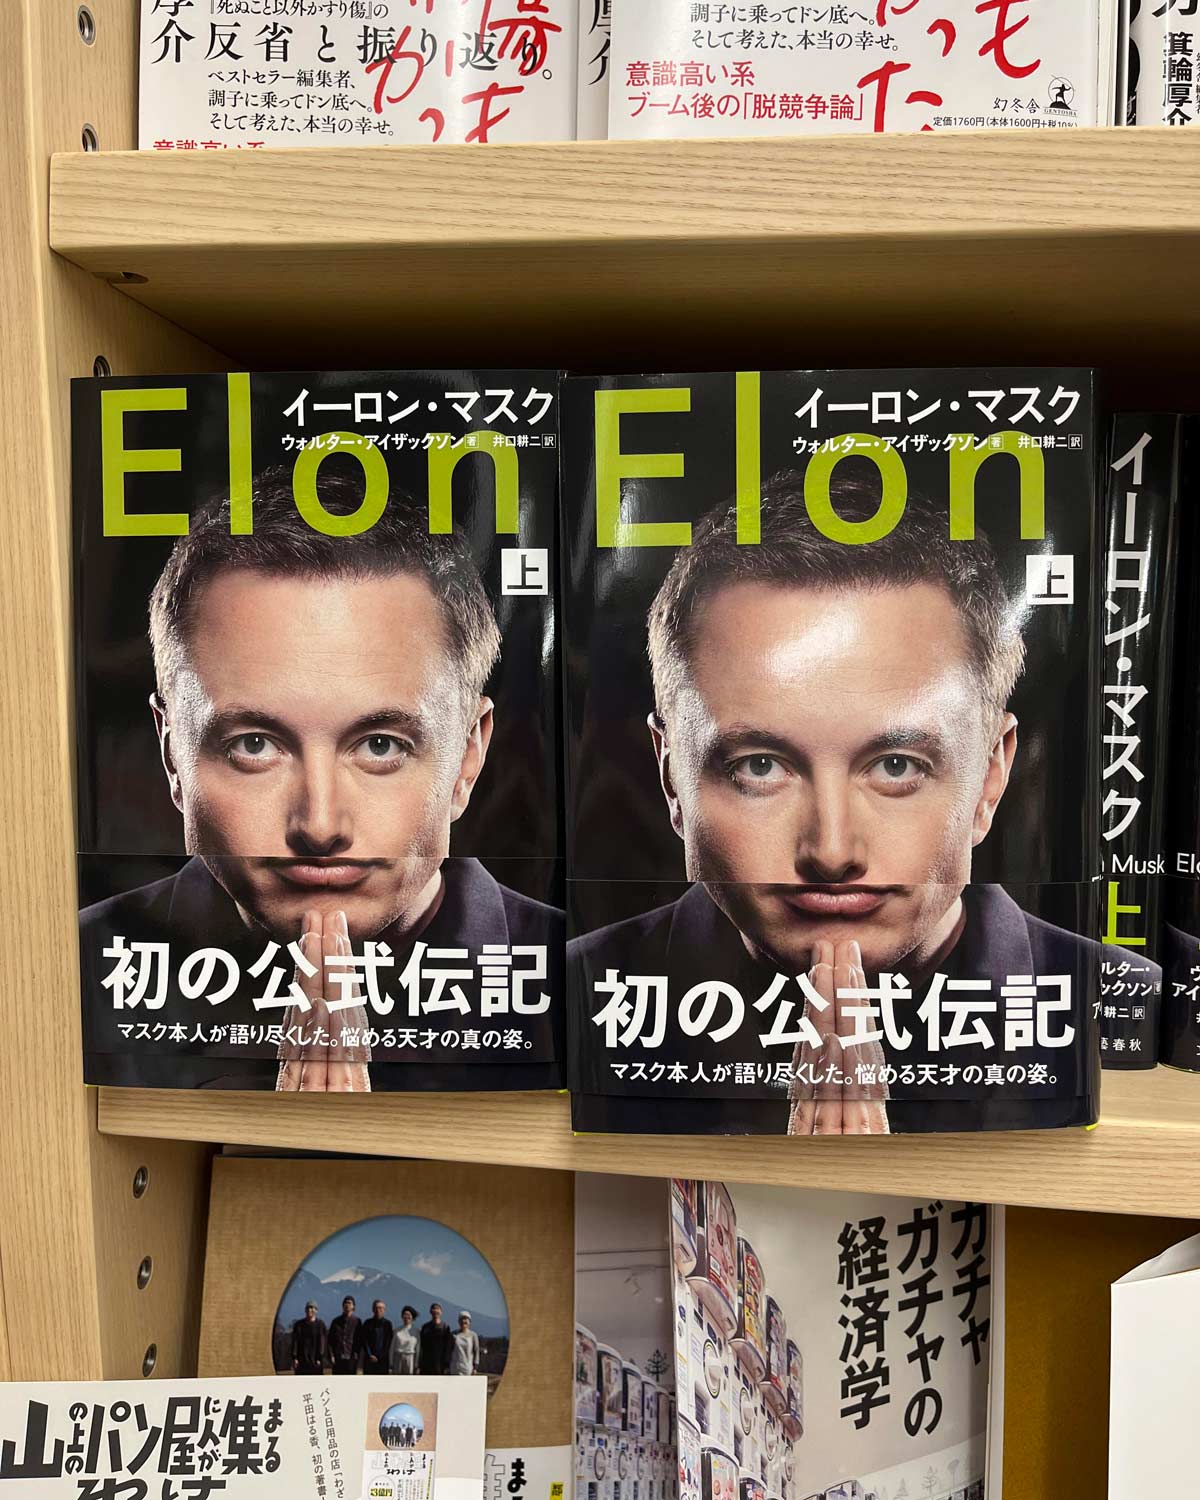 Elon's biography in Japanese just... hits different